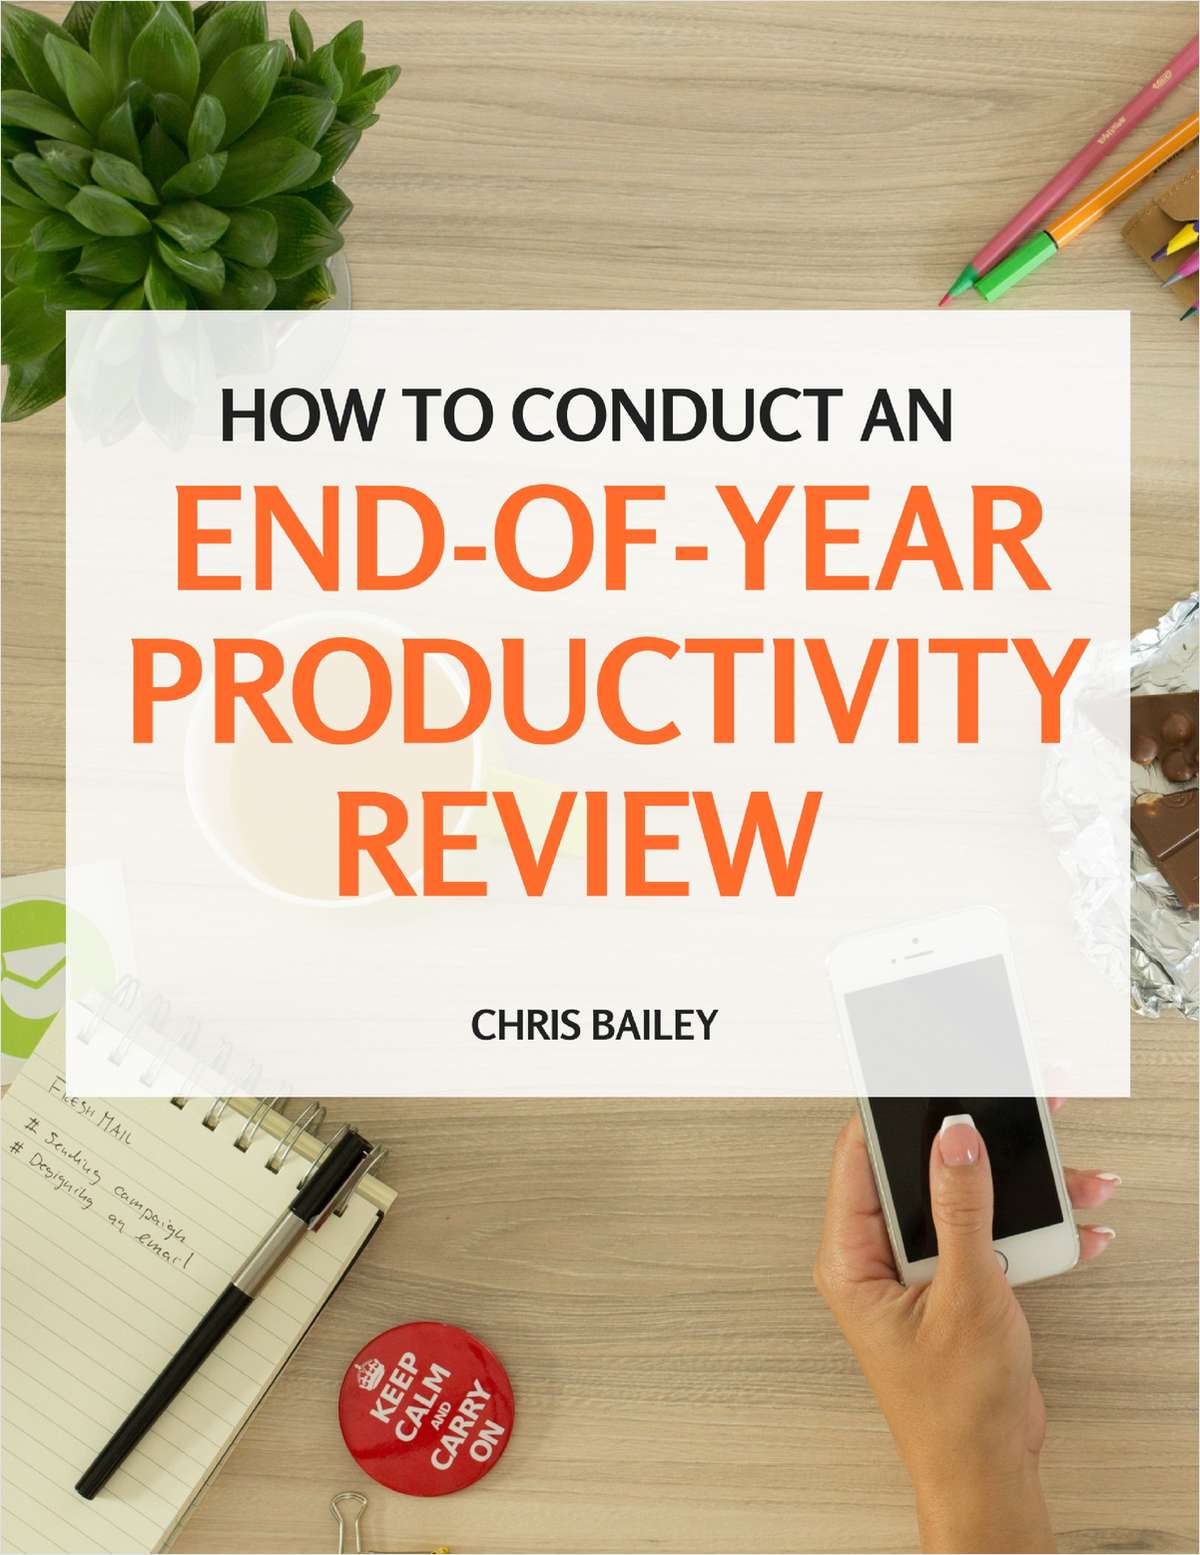 How to Conduct an End-of-Year Productivity Review